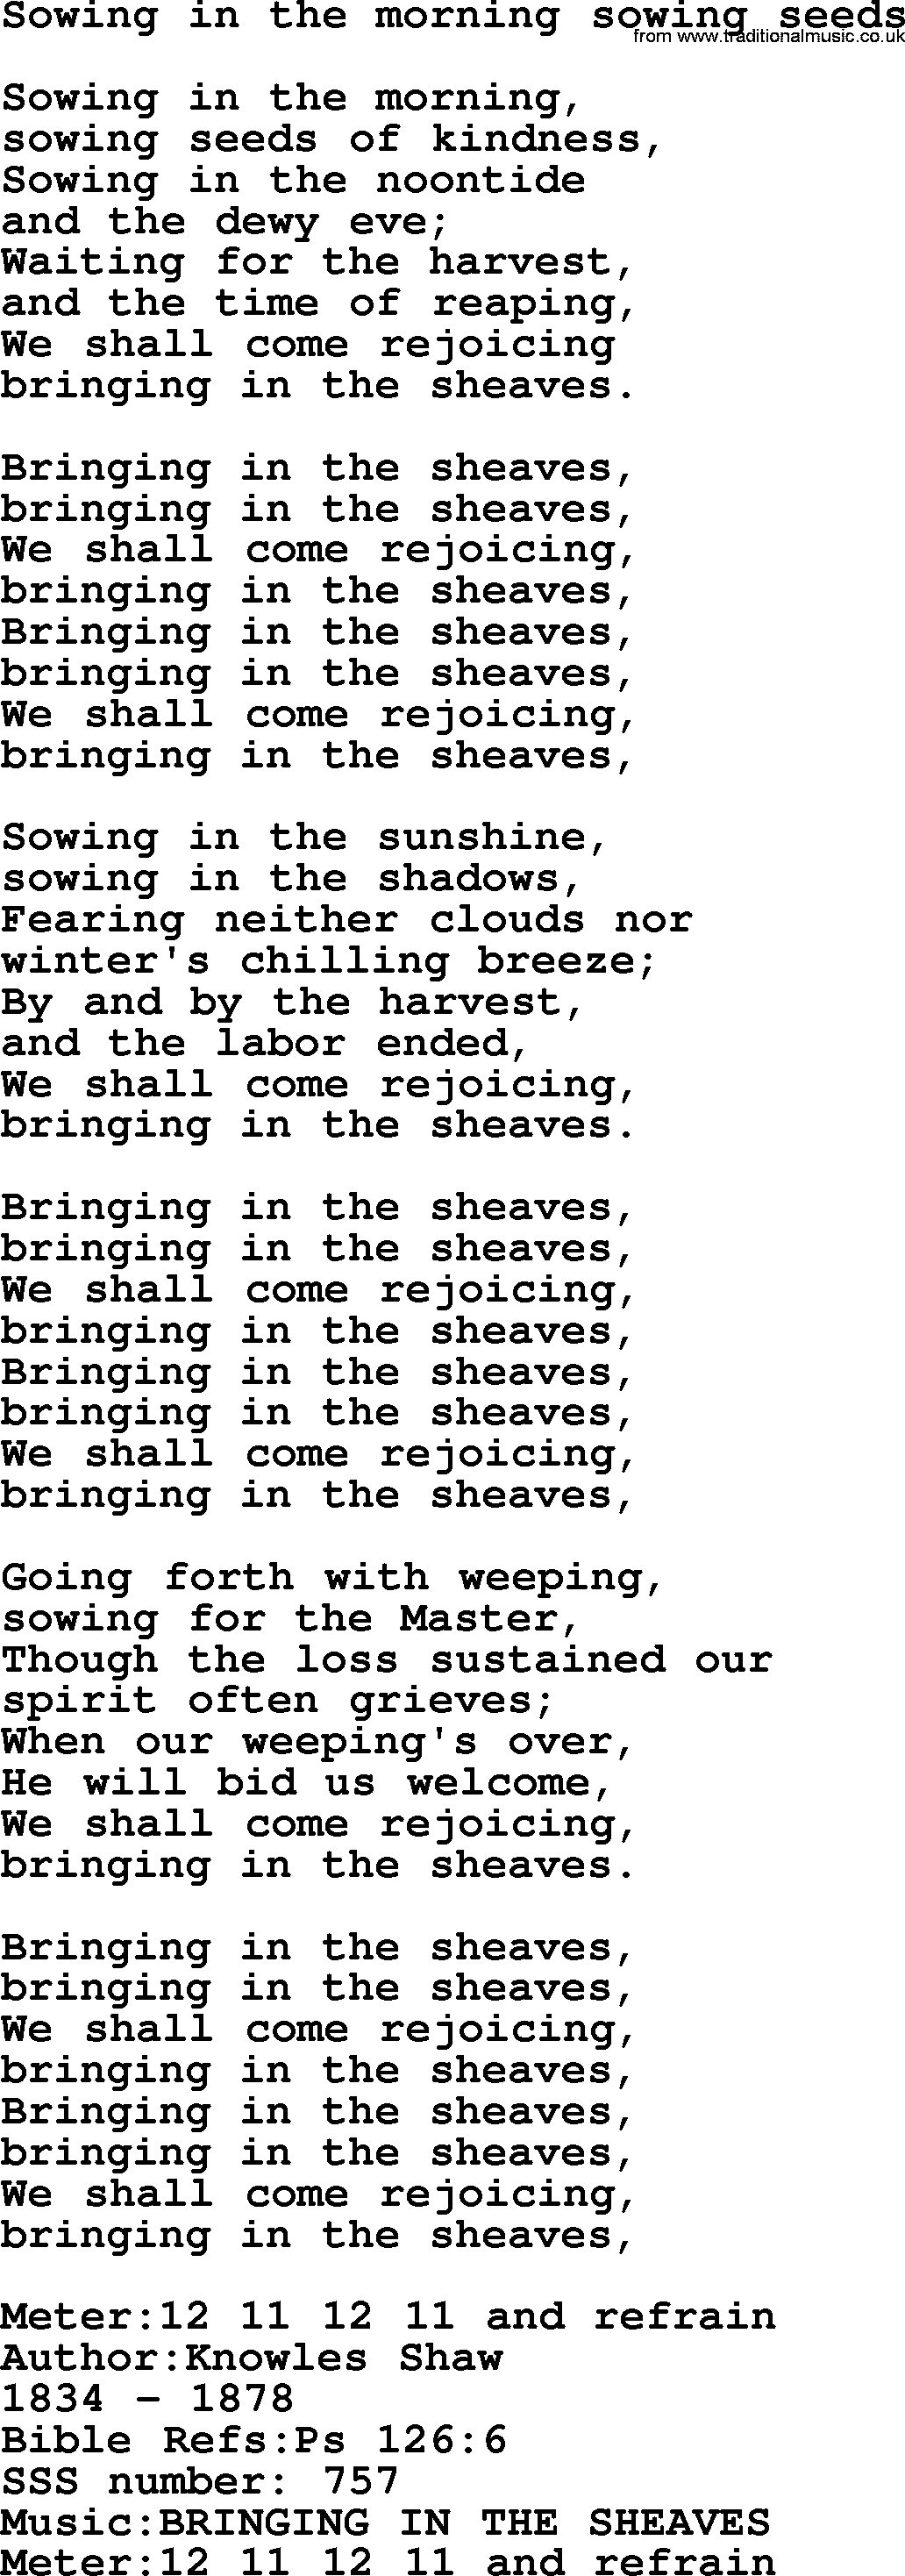 Sacred Songs and Solos complete, 1200 Hymns, title: Sowing In The Morning Sowing Seeds, lyrics and PDF